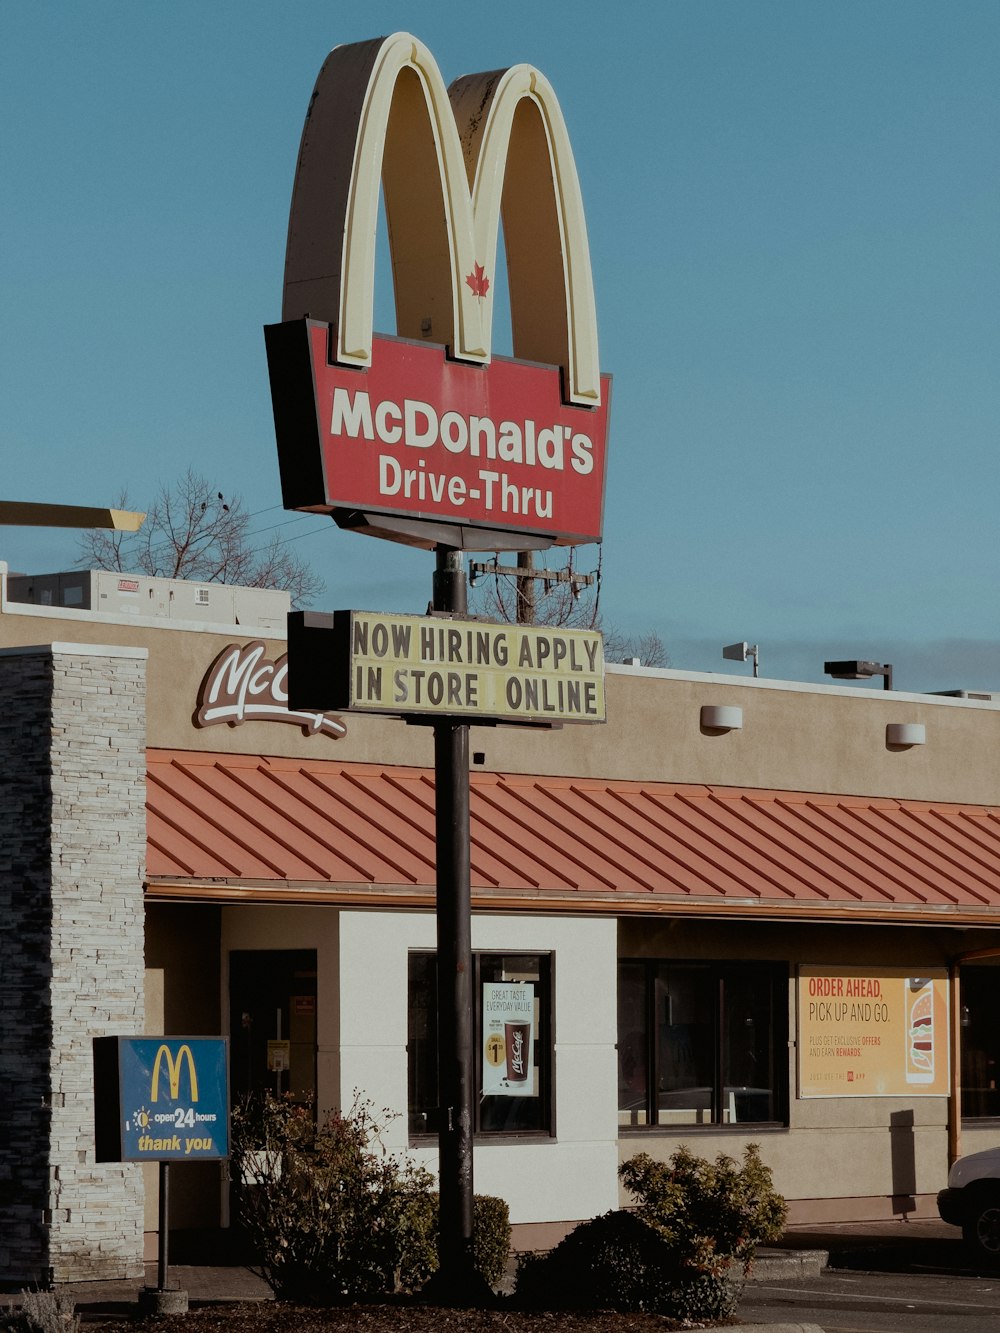 a mcdonald's drive thru sign in front of a store